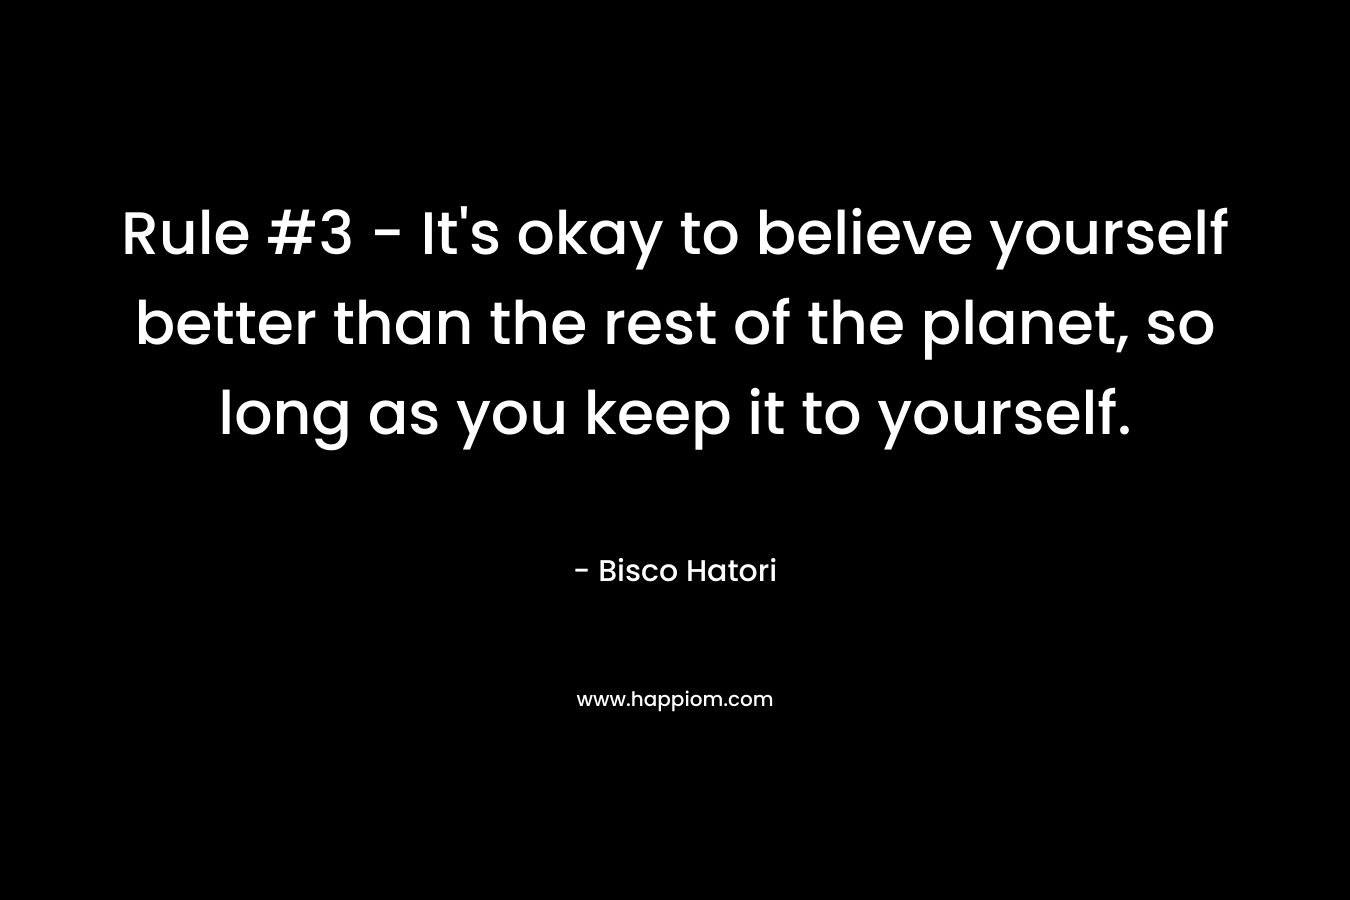 Rule #3 - It's okay to believe yourself better than the rest of the planet, so long as you keep it to yourself.